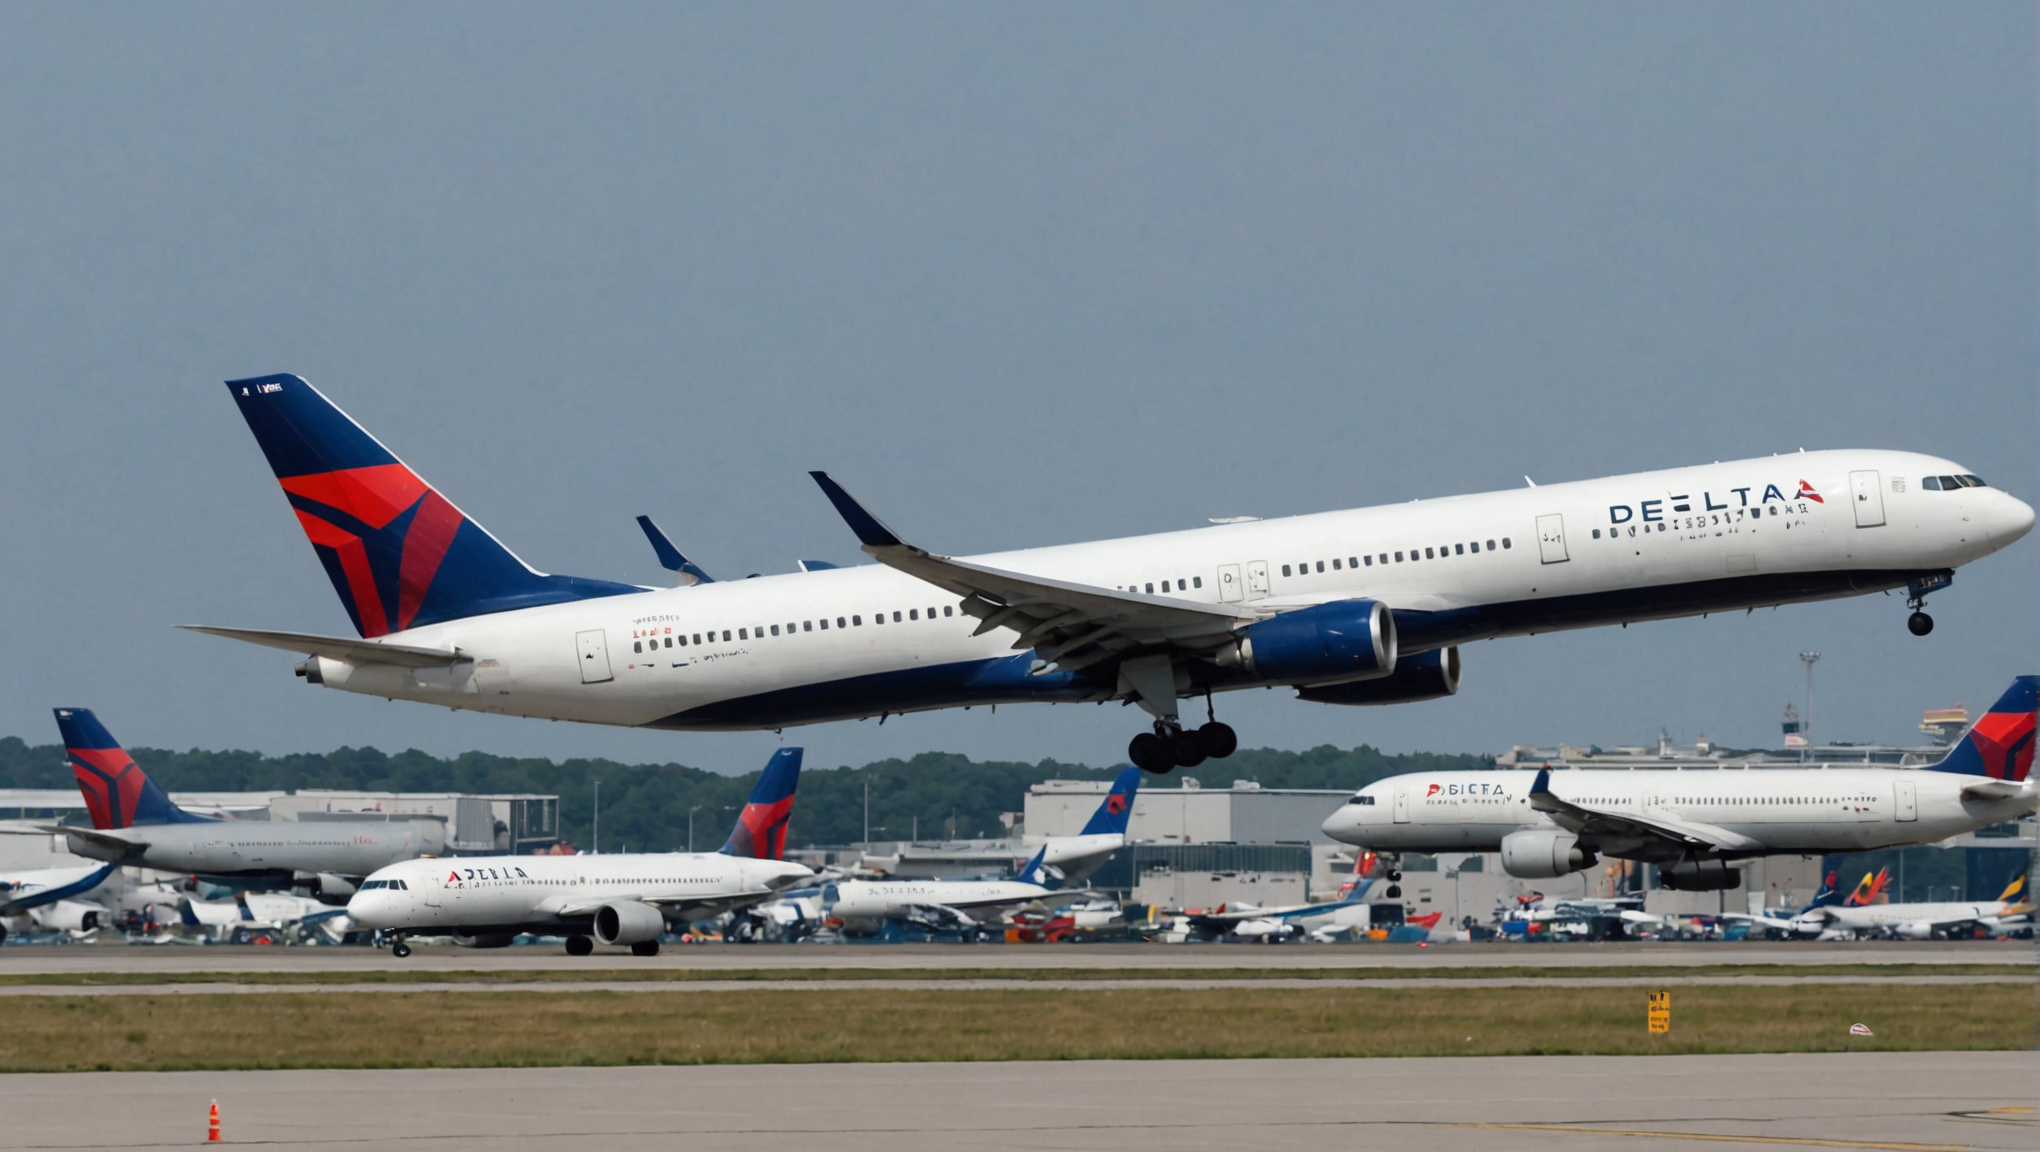 a delta air lines flight makes an emergency landing at jfk airport following a case of in-flight food poisoning. find out more about this unprecedented incident.